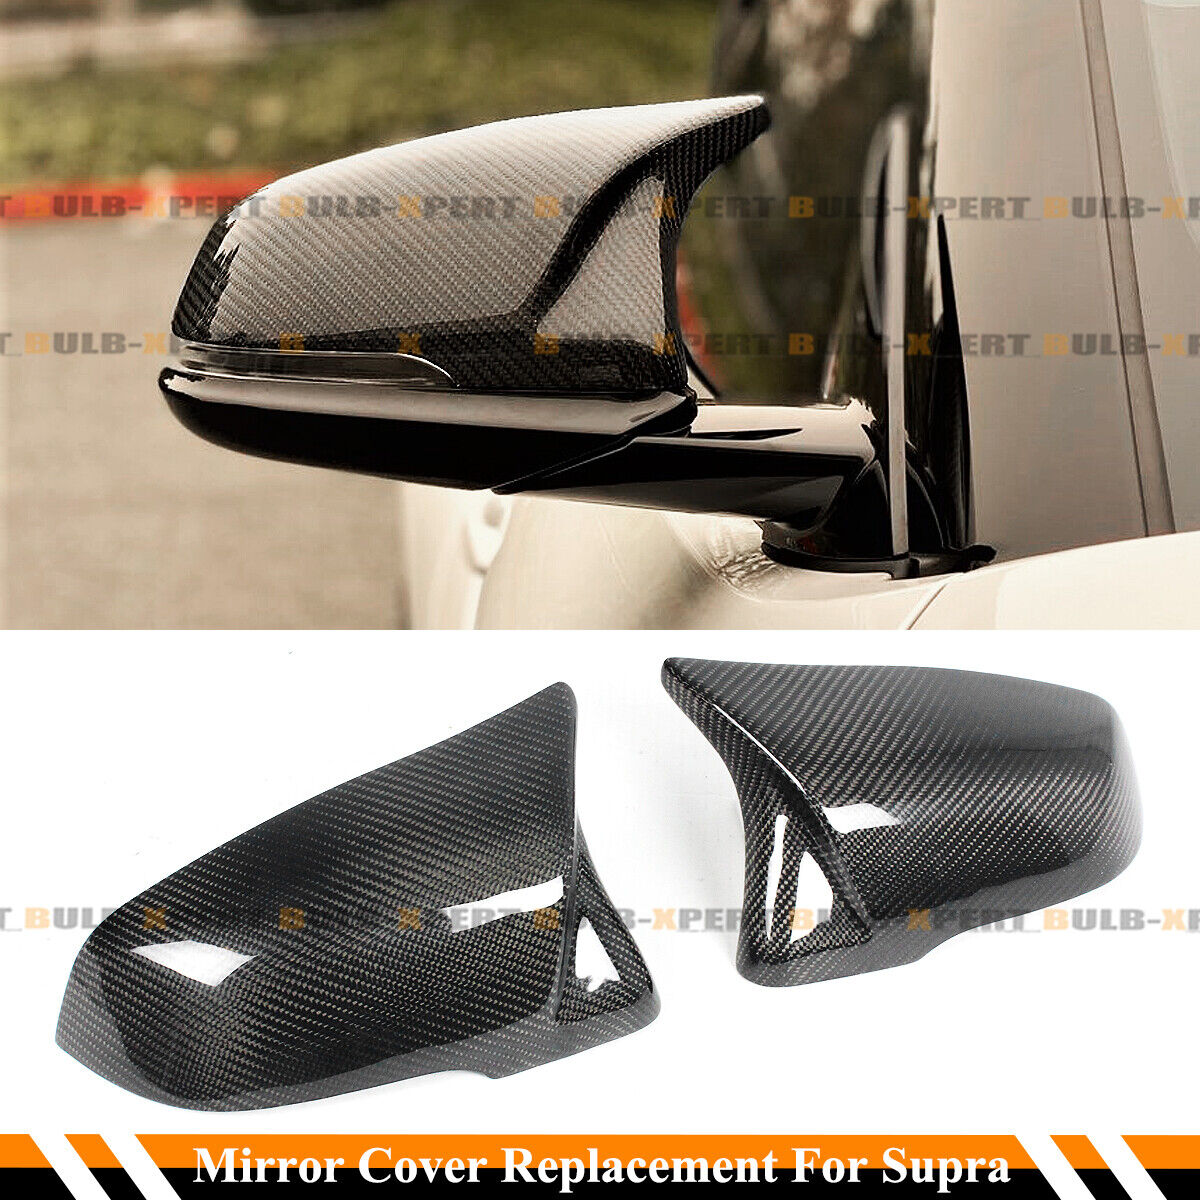 FOR 2020-24 TOYOTA SUPRA A90 M STYLE CARBON FIBER REPLACEMENT MIRROR COVERS CAPS